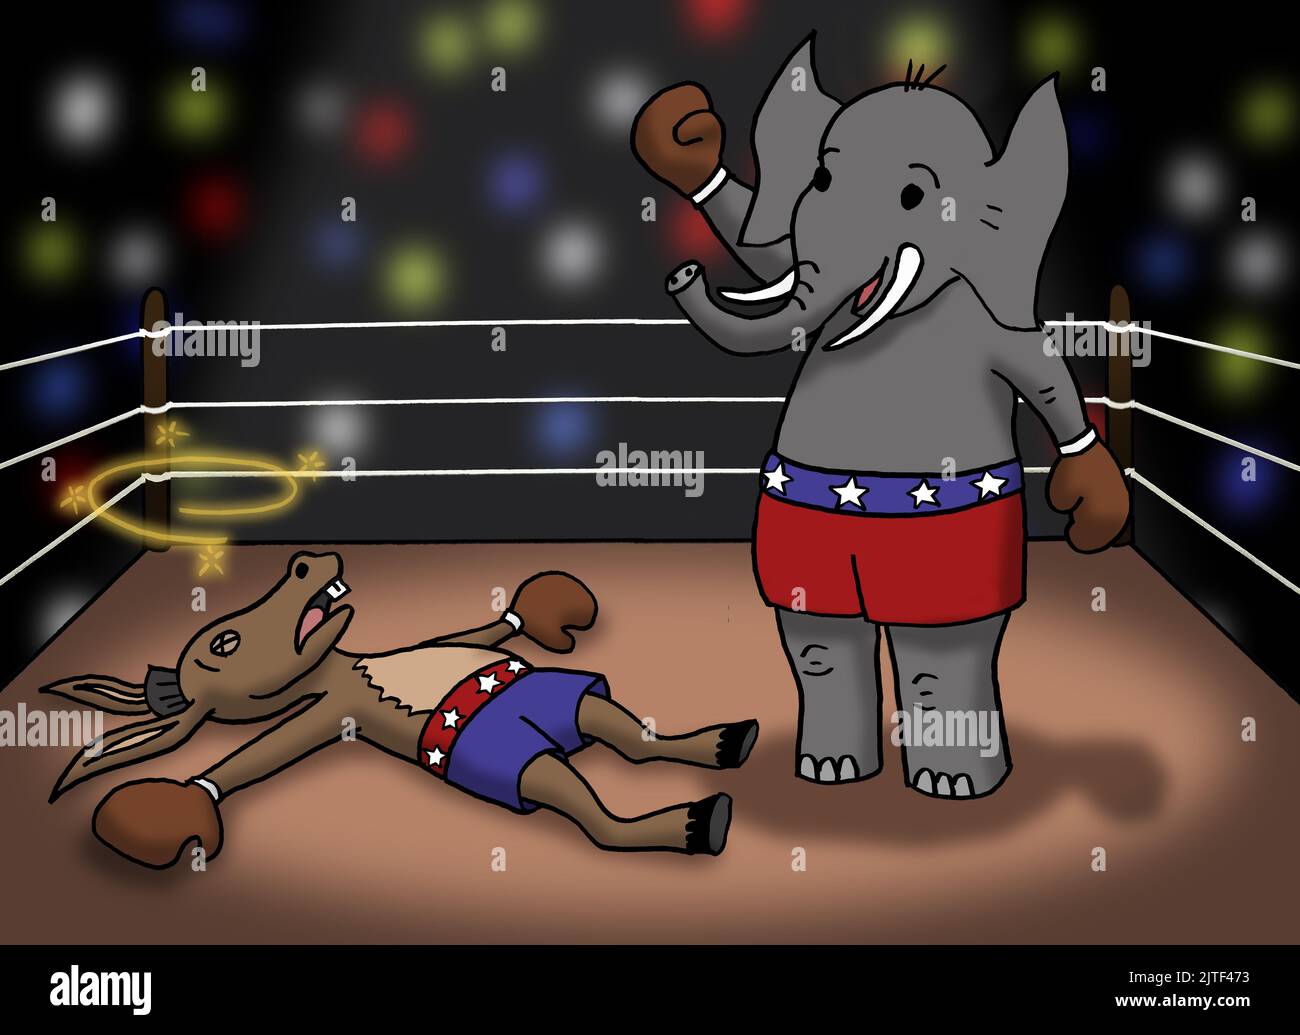 The Republican Elephant stands in victory over the Democrat Donkey in a boxing ring.  United States political cartoon. Stock Photo